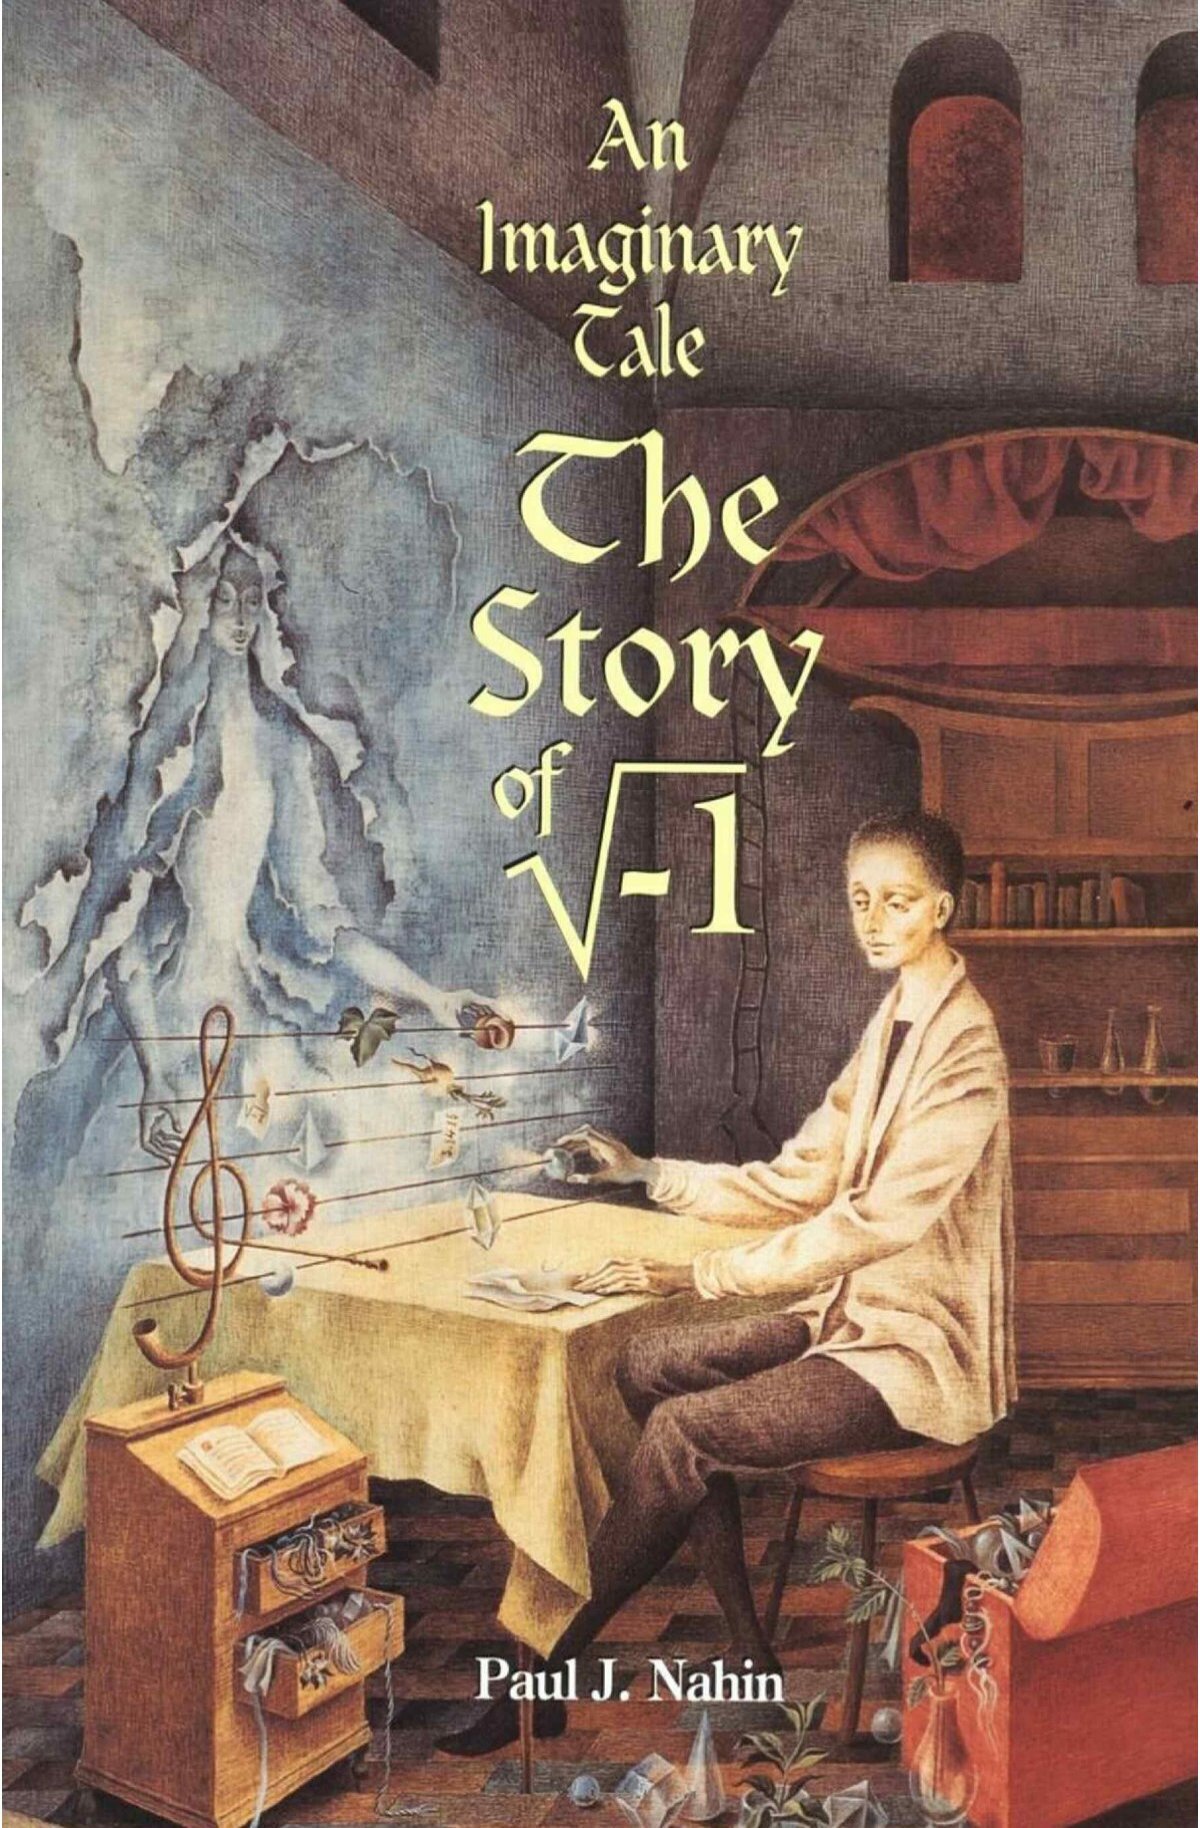 Paul J. Nahin - An Imaginary Tale The Story of i the Square Root 